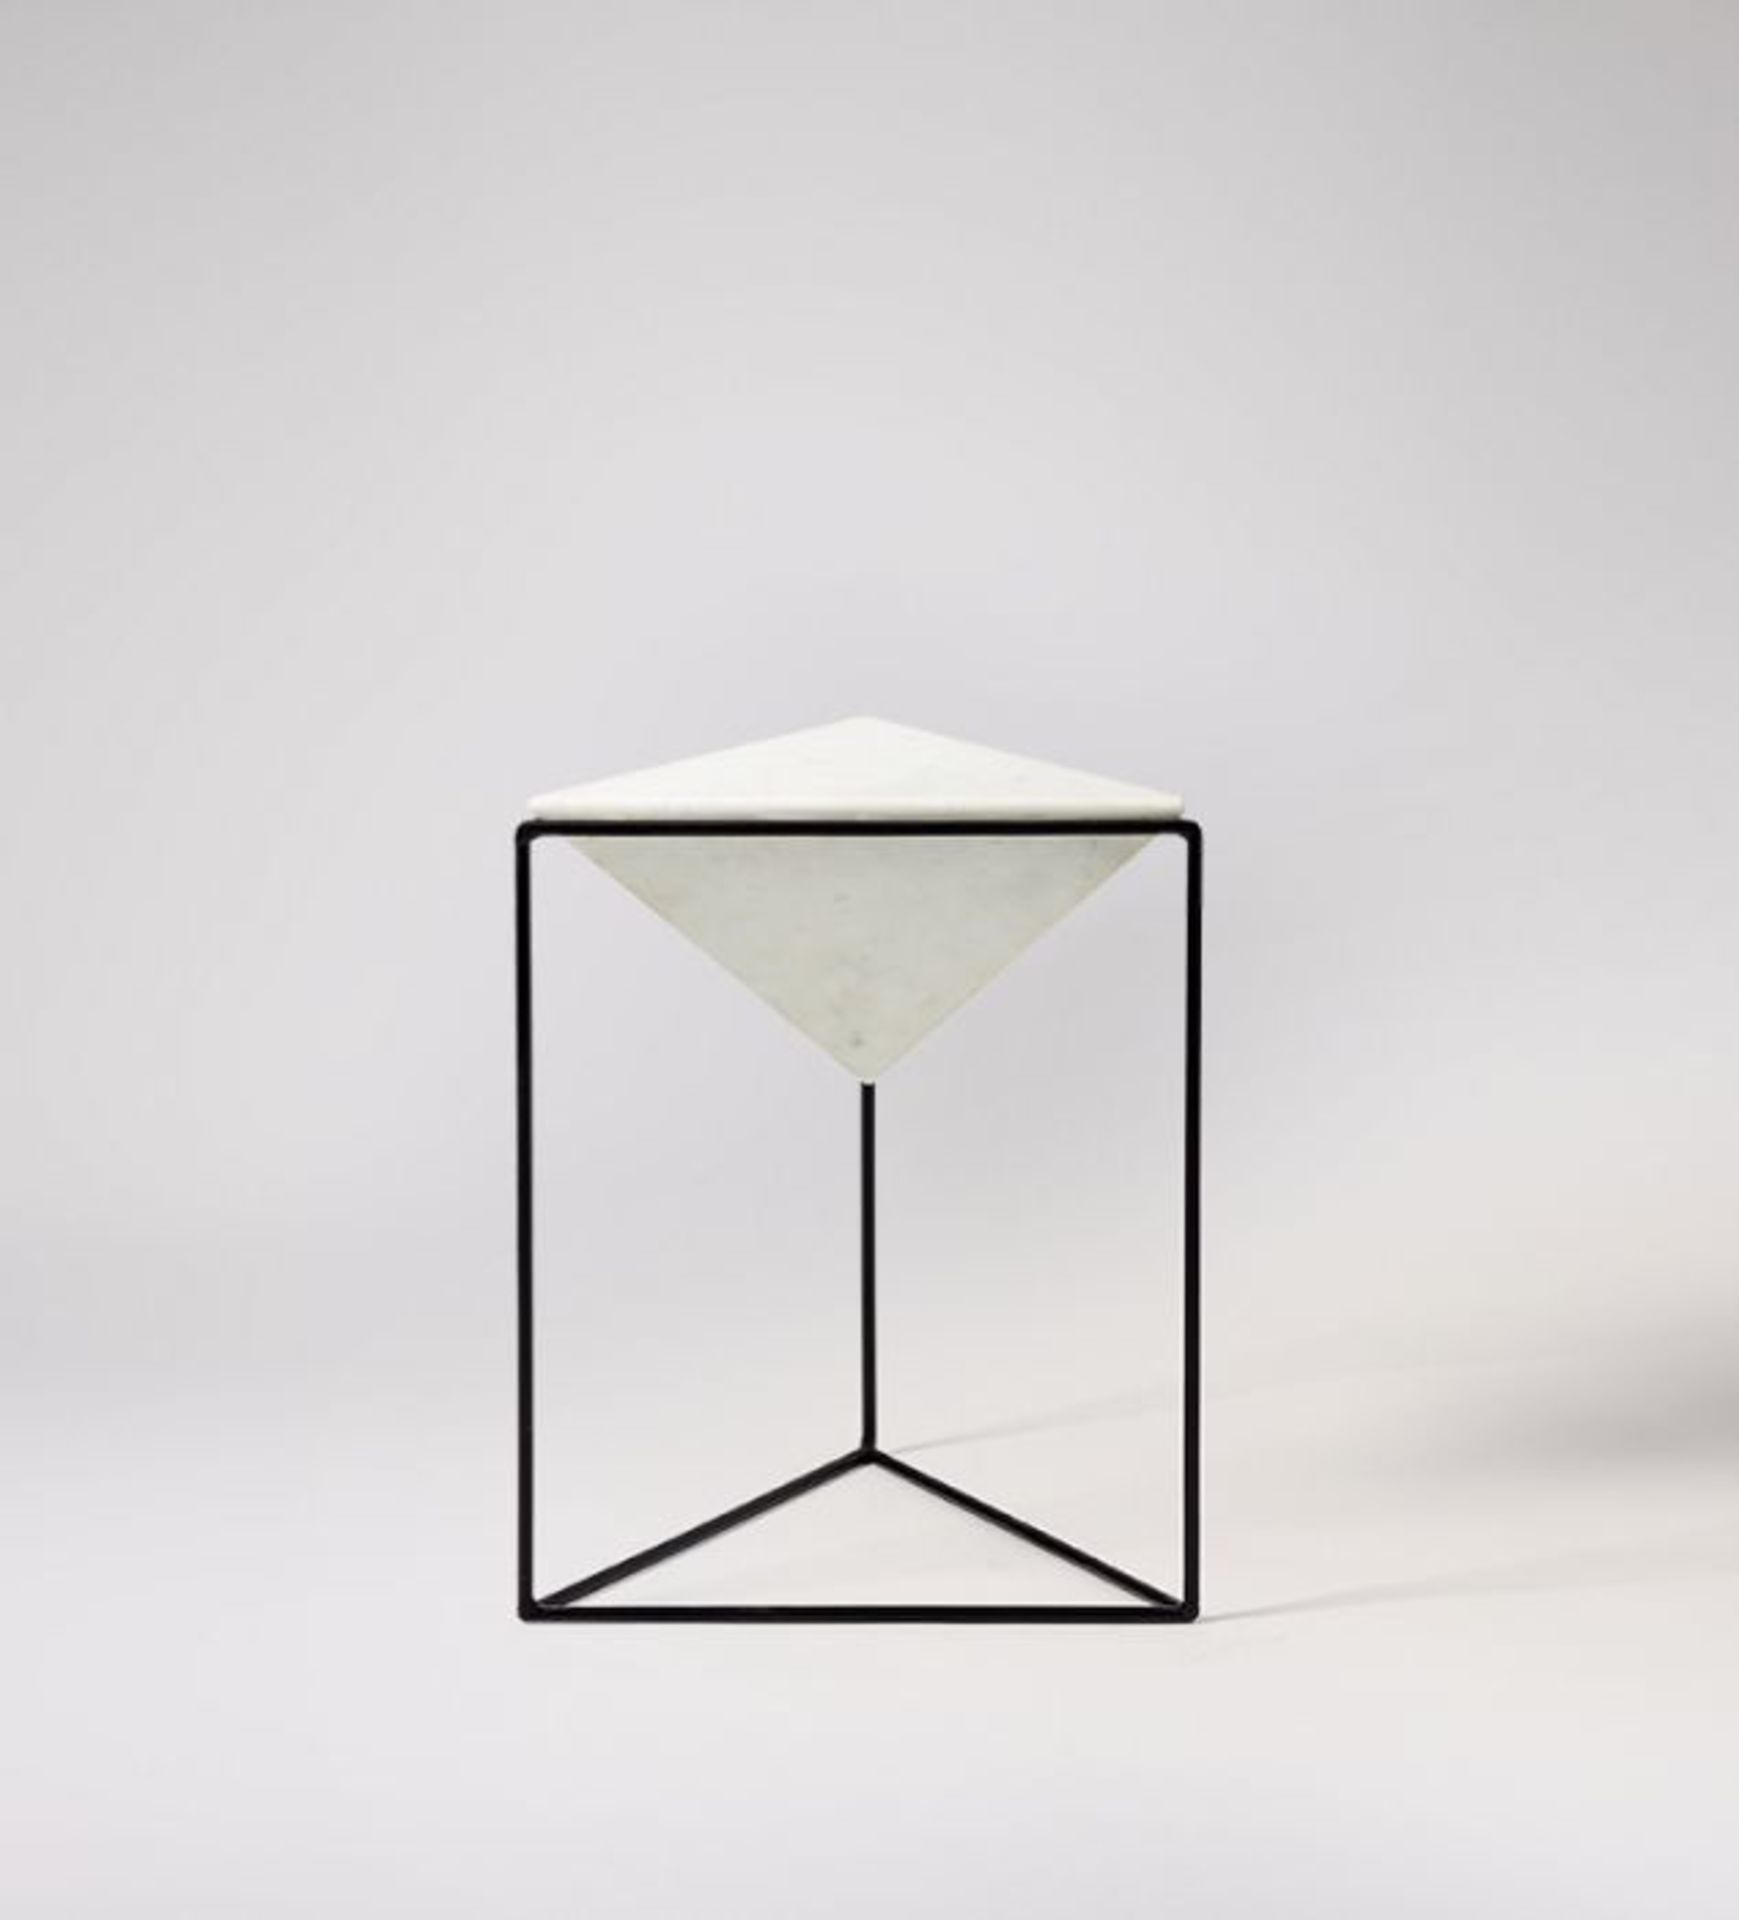 Swoon Cairo Side Table in White Marble RRP £229 SKU SWO-GW-cairosidtabblamar-A+ PID SWO-GW-19050 - Image 3 of 6